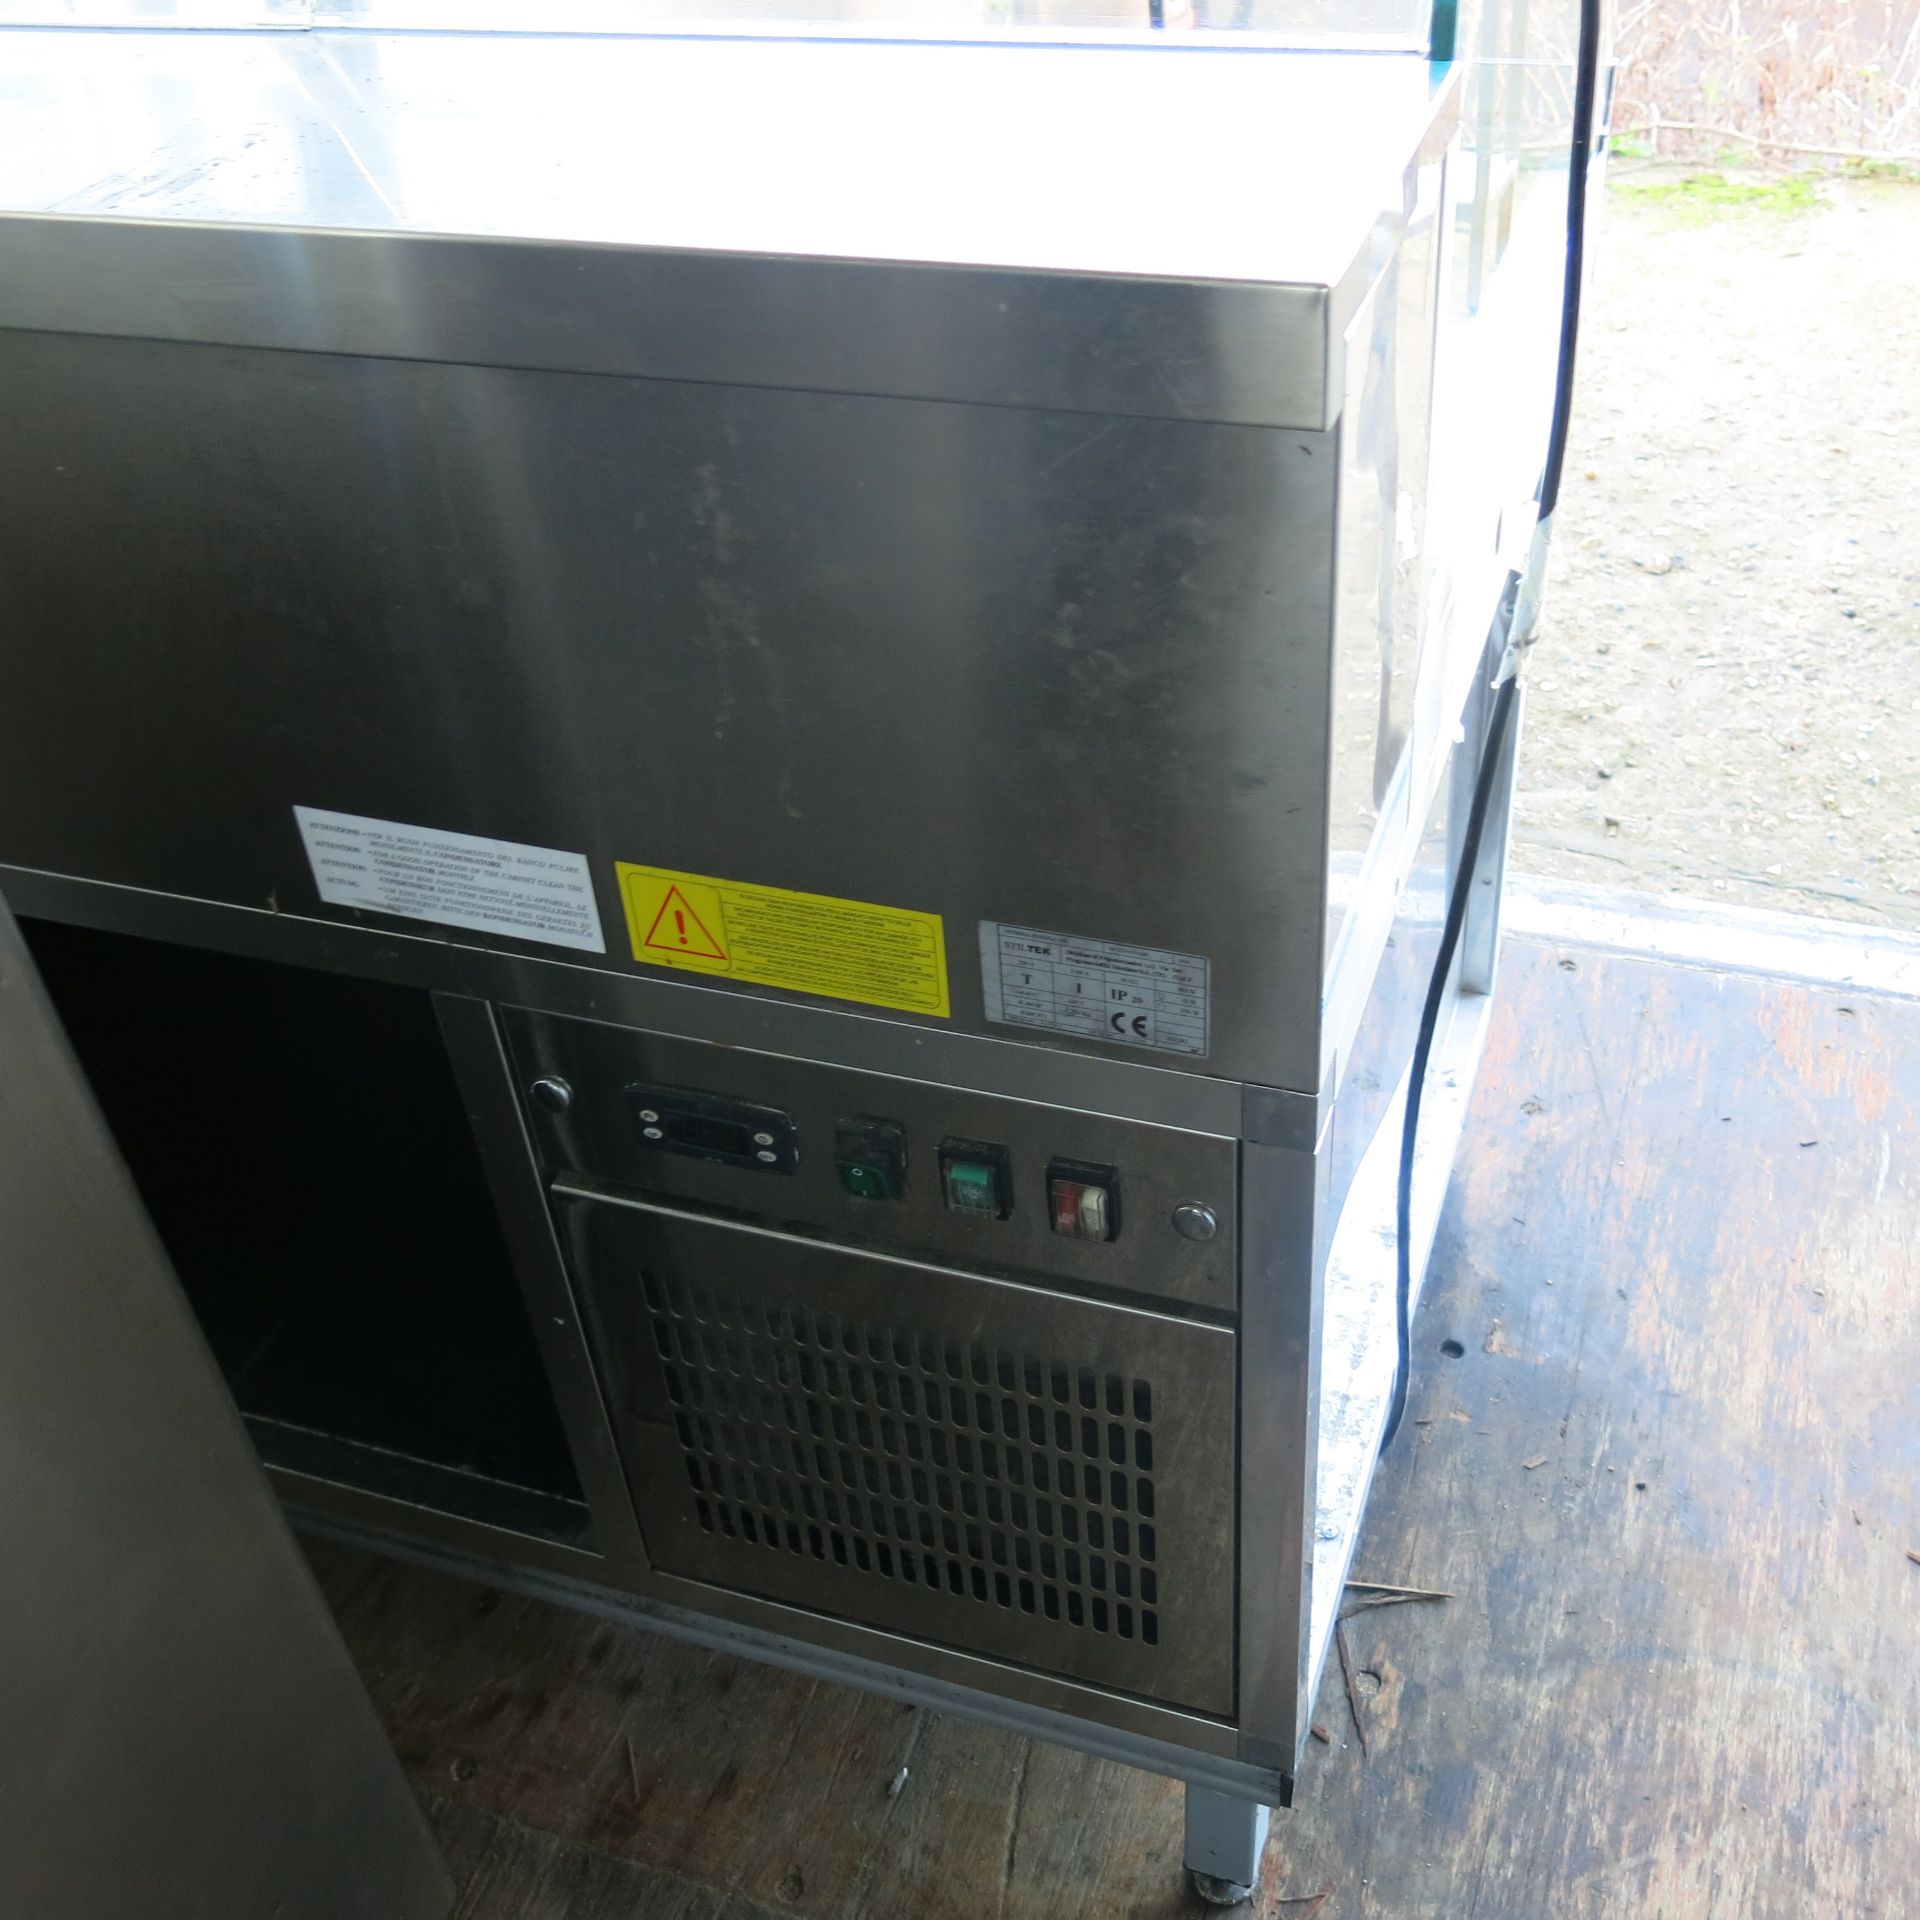 Stiltek Illuminated Glass Fronted Refrigerated Display Chiller, Model VETRINA FREDDA 100. Comes with - Image 4 of 6